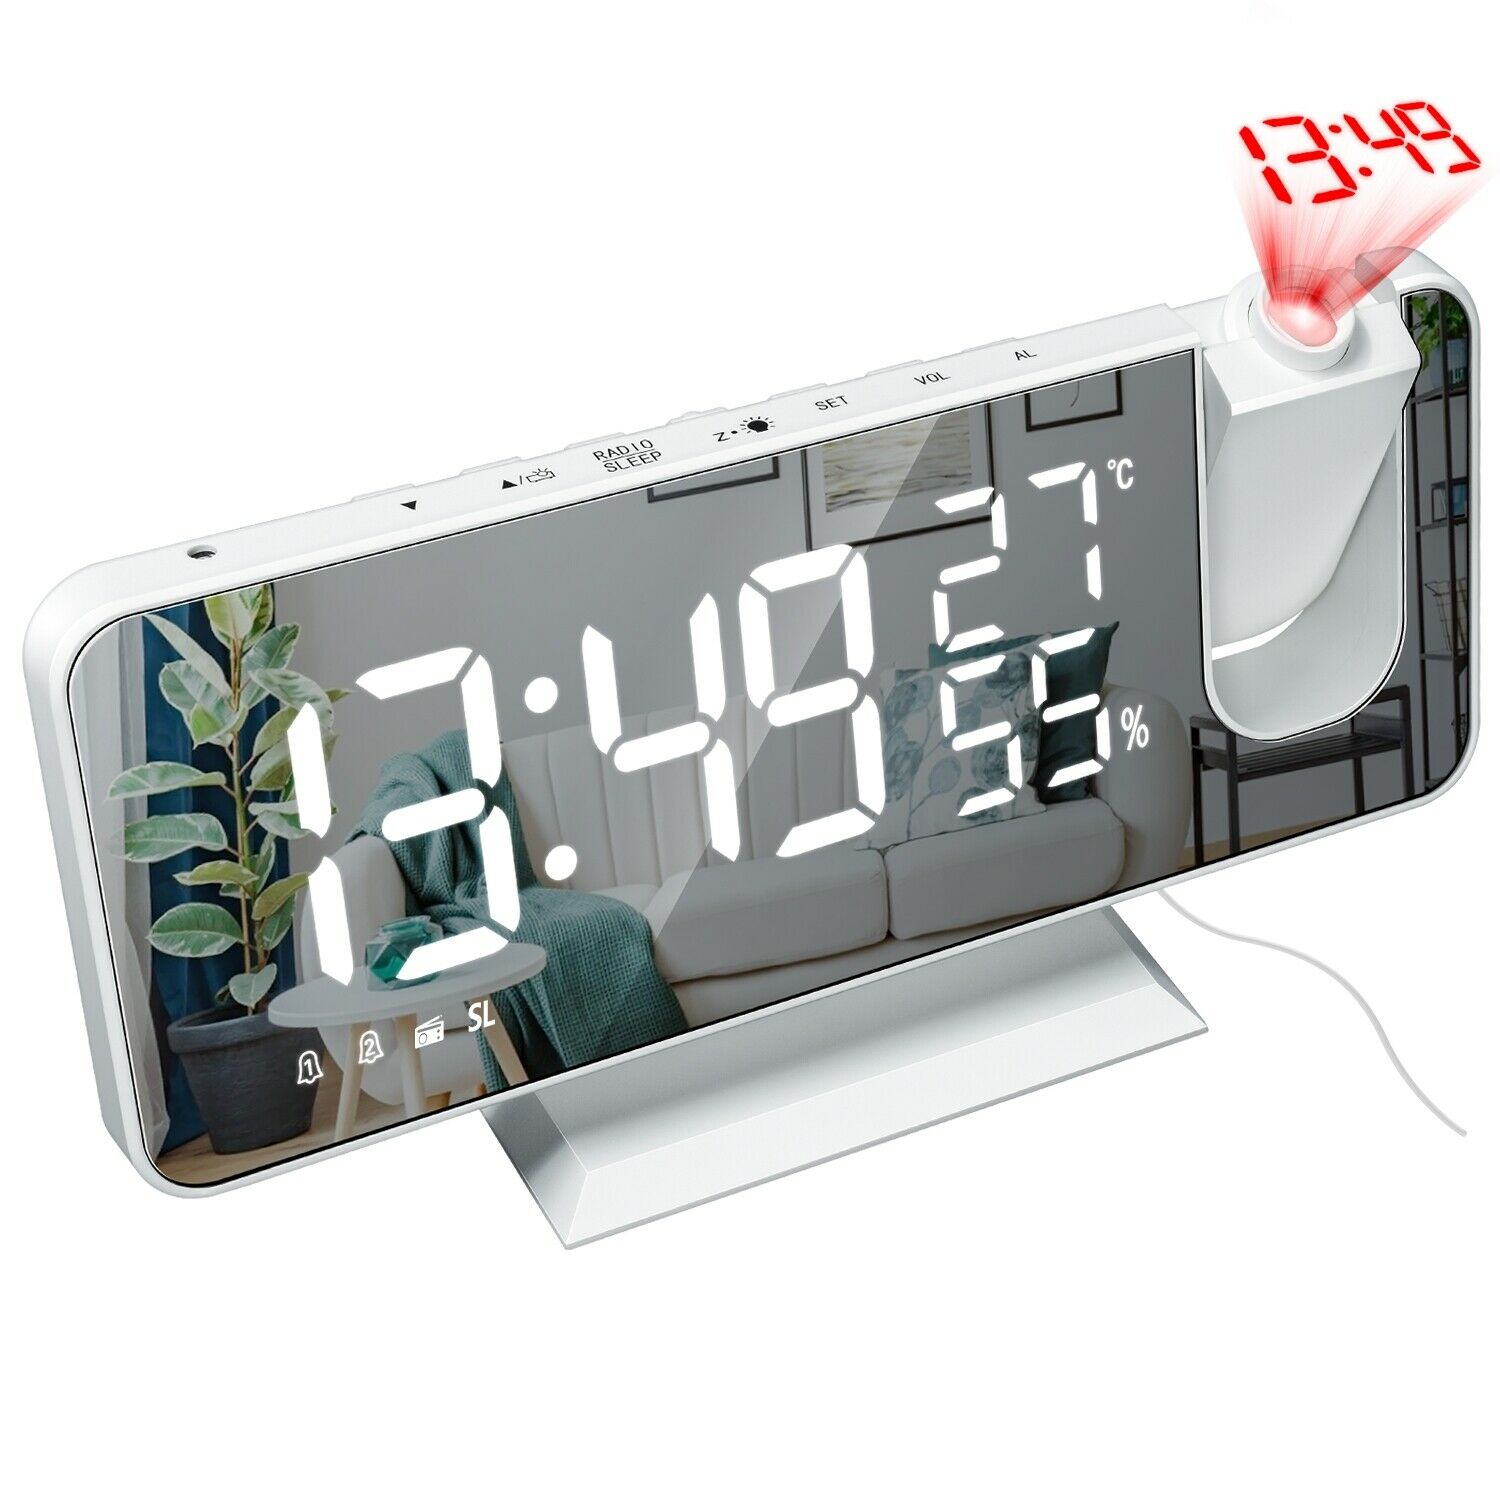 7.5-inch Led Digital Projector Projection Snooze 2 Alarm Clock Fm Radio Timer White and white letter